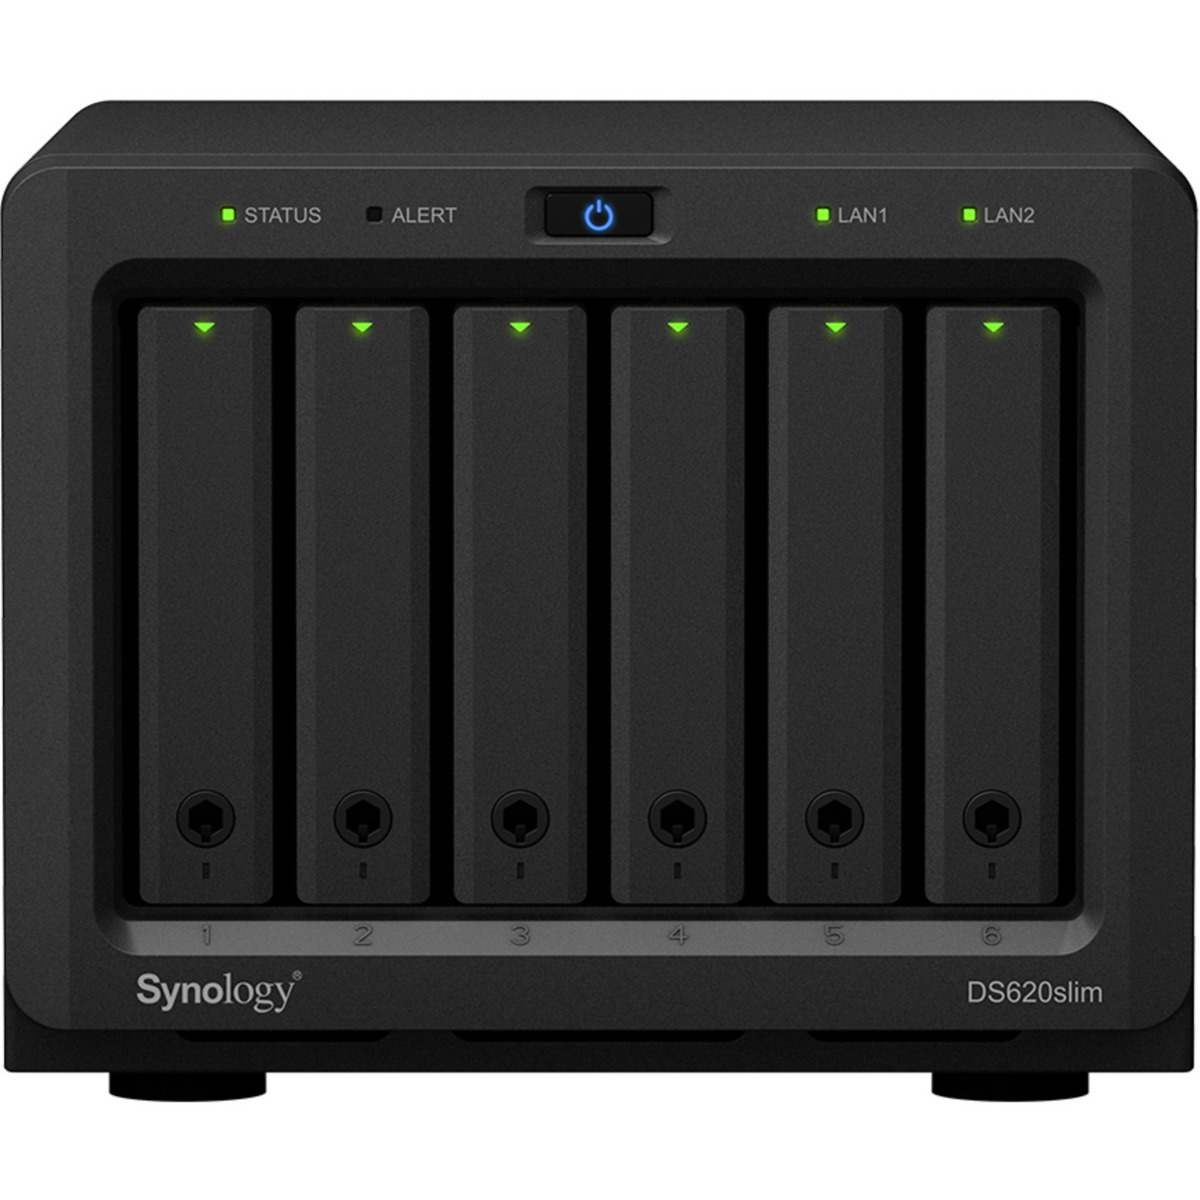 buy $1192 Synology DiskStation DS620slim 6tb Desktop NAS - Network Attached Storage Device 6x1000gb Samsung 870 QVO MZ-77Q1T0 2.5 SATA 6Gb/s SSD CONSUMER Class Drives Installed - Burn-In Tested - FREE RAM UPGRADE - nas headquarters buy network attached storage server device das new raid-5 free shipping usa DiskStation DS620slim